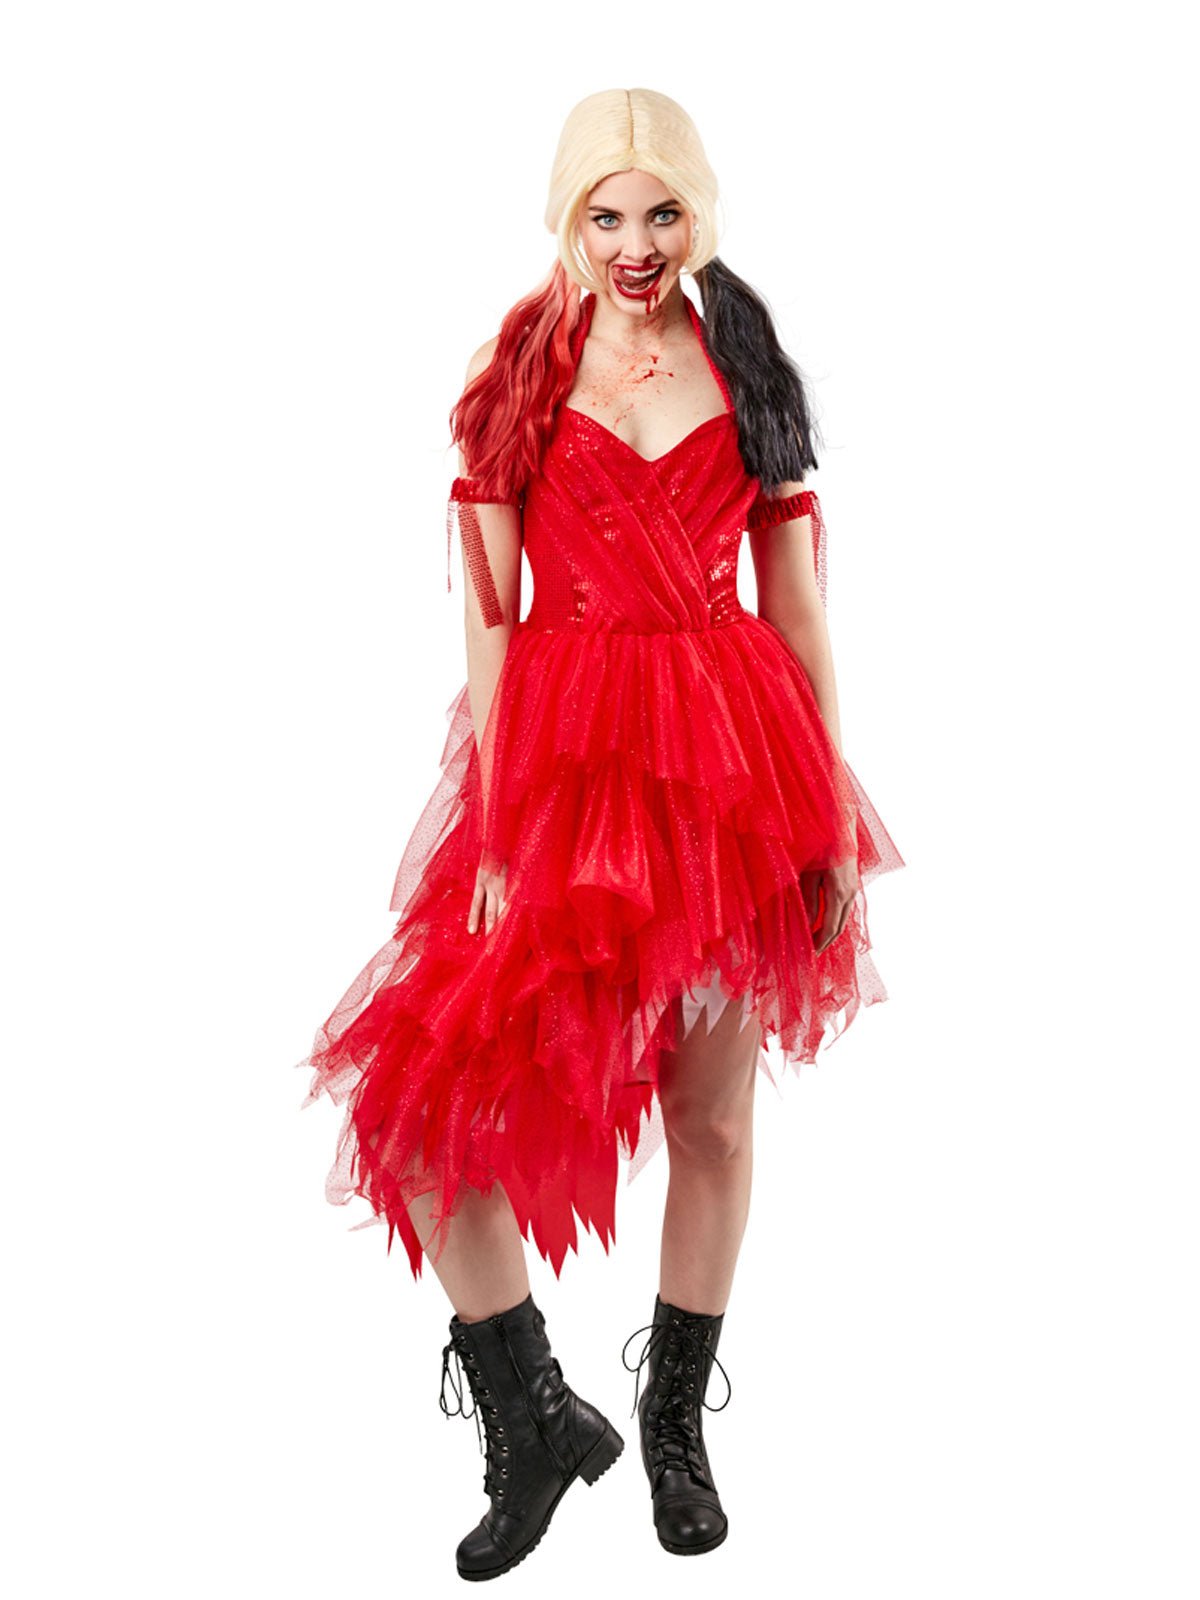 Shop the Look: Harley Quinn Red Dress Costume for Adults